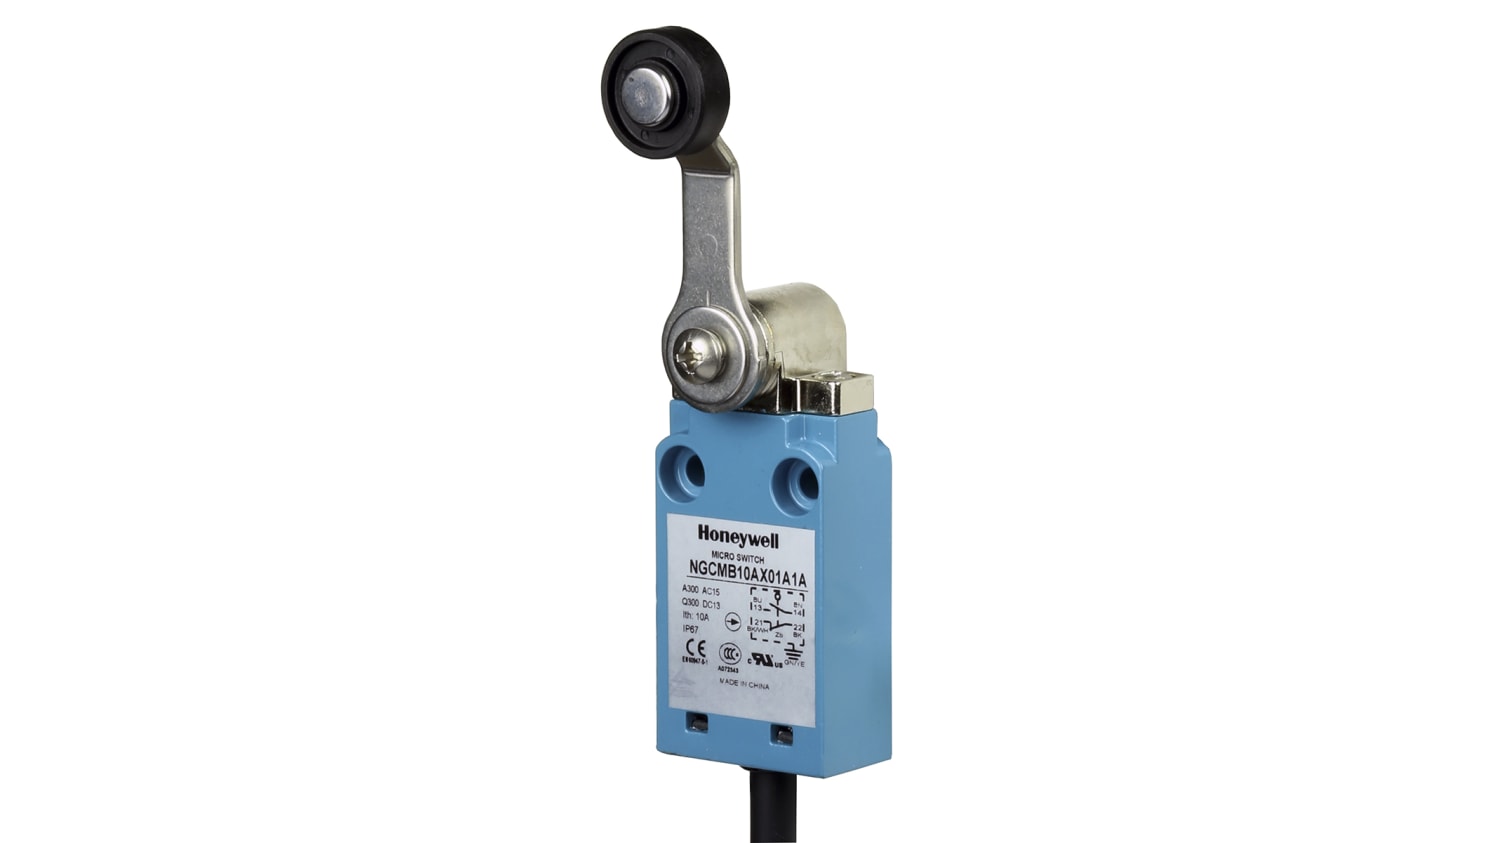 Ngcmb10ax01a1a Honeywell Positive Break Snap Action Limit Switch Metal No Nc Rotary Lever 240v Ip67 Rs Components